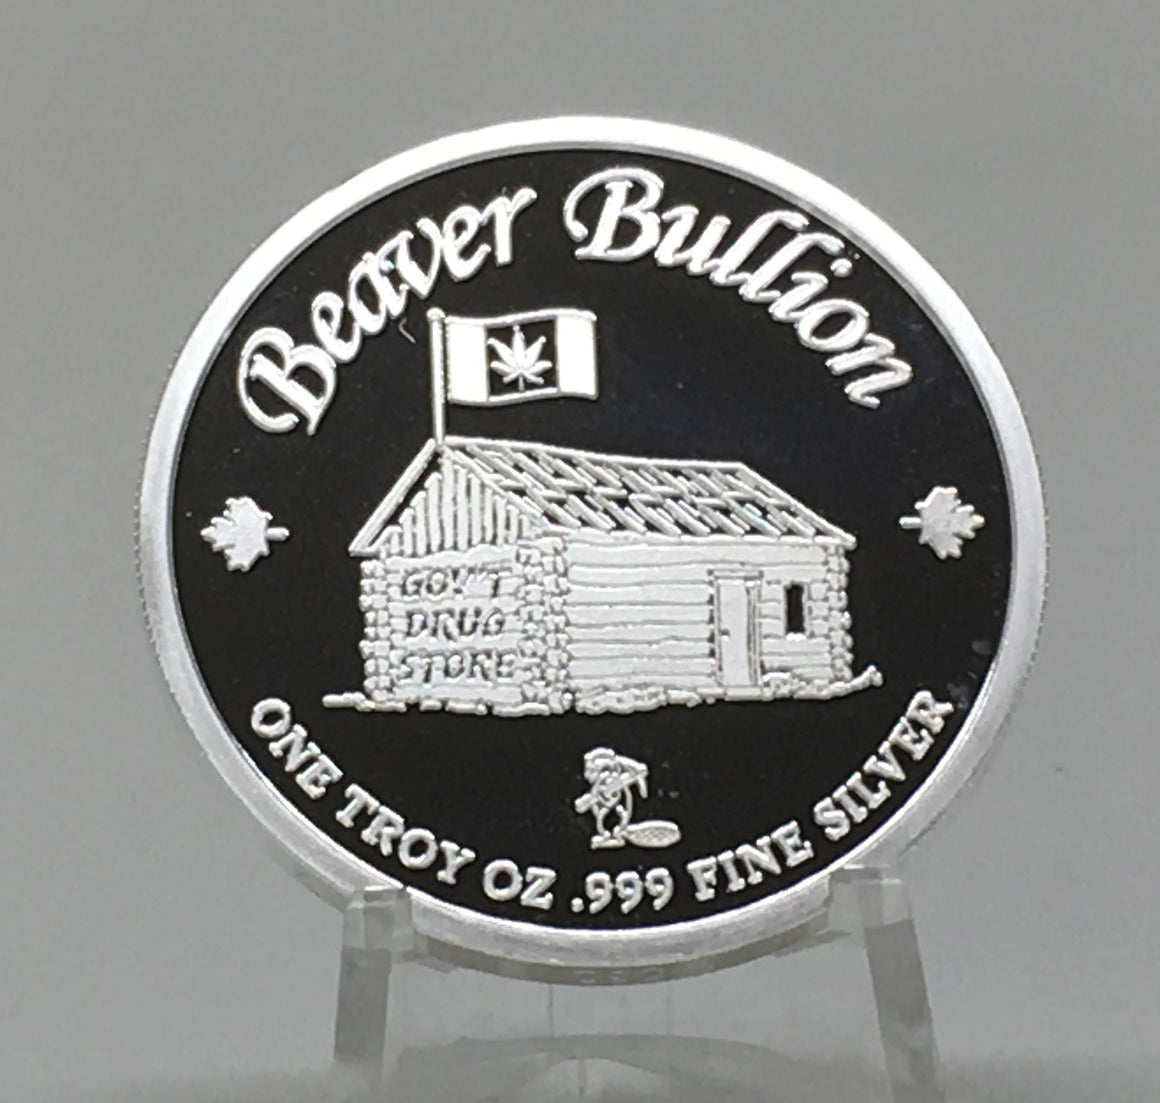 Toking Beaver - The True North High and Free by Beaver Bullion, 1oz .999 Proof Silver Round